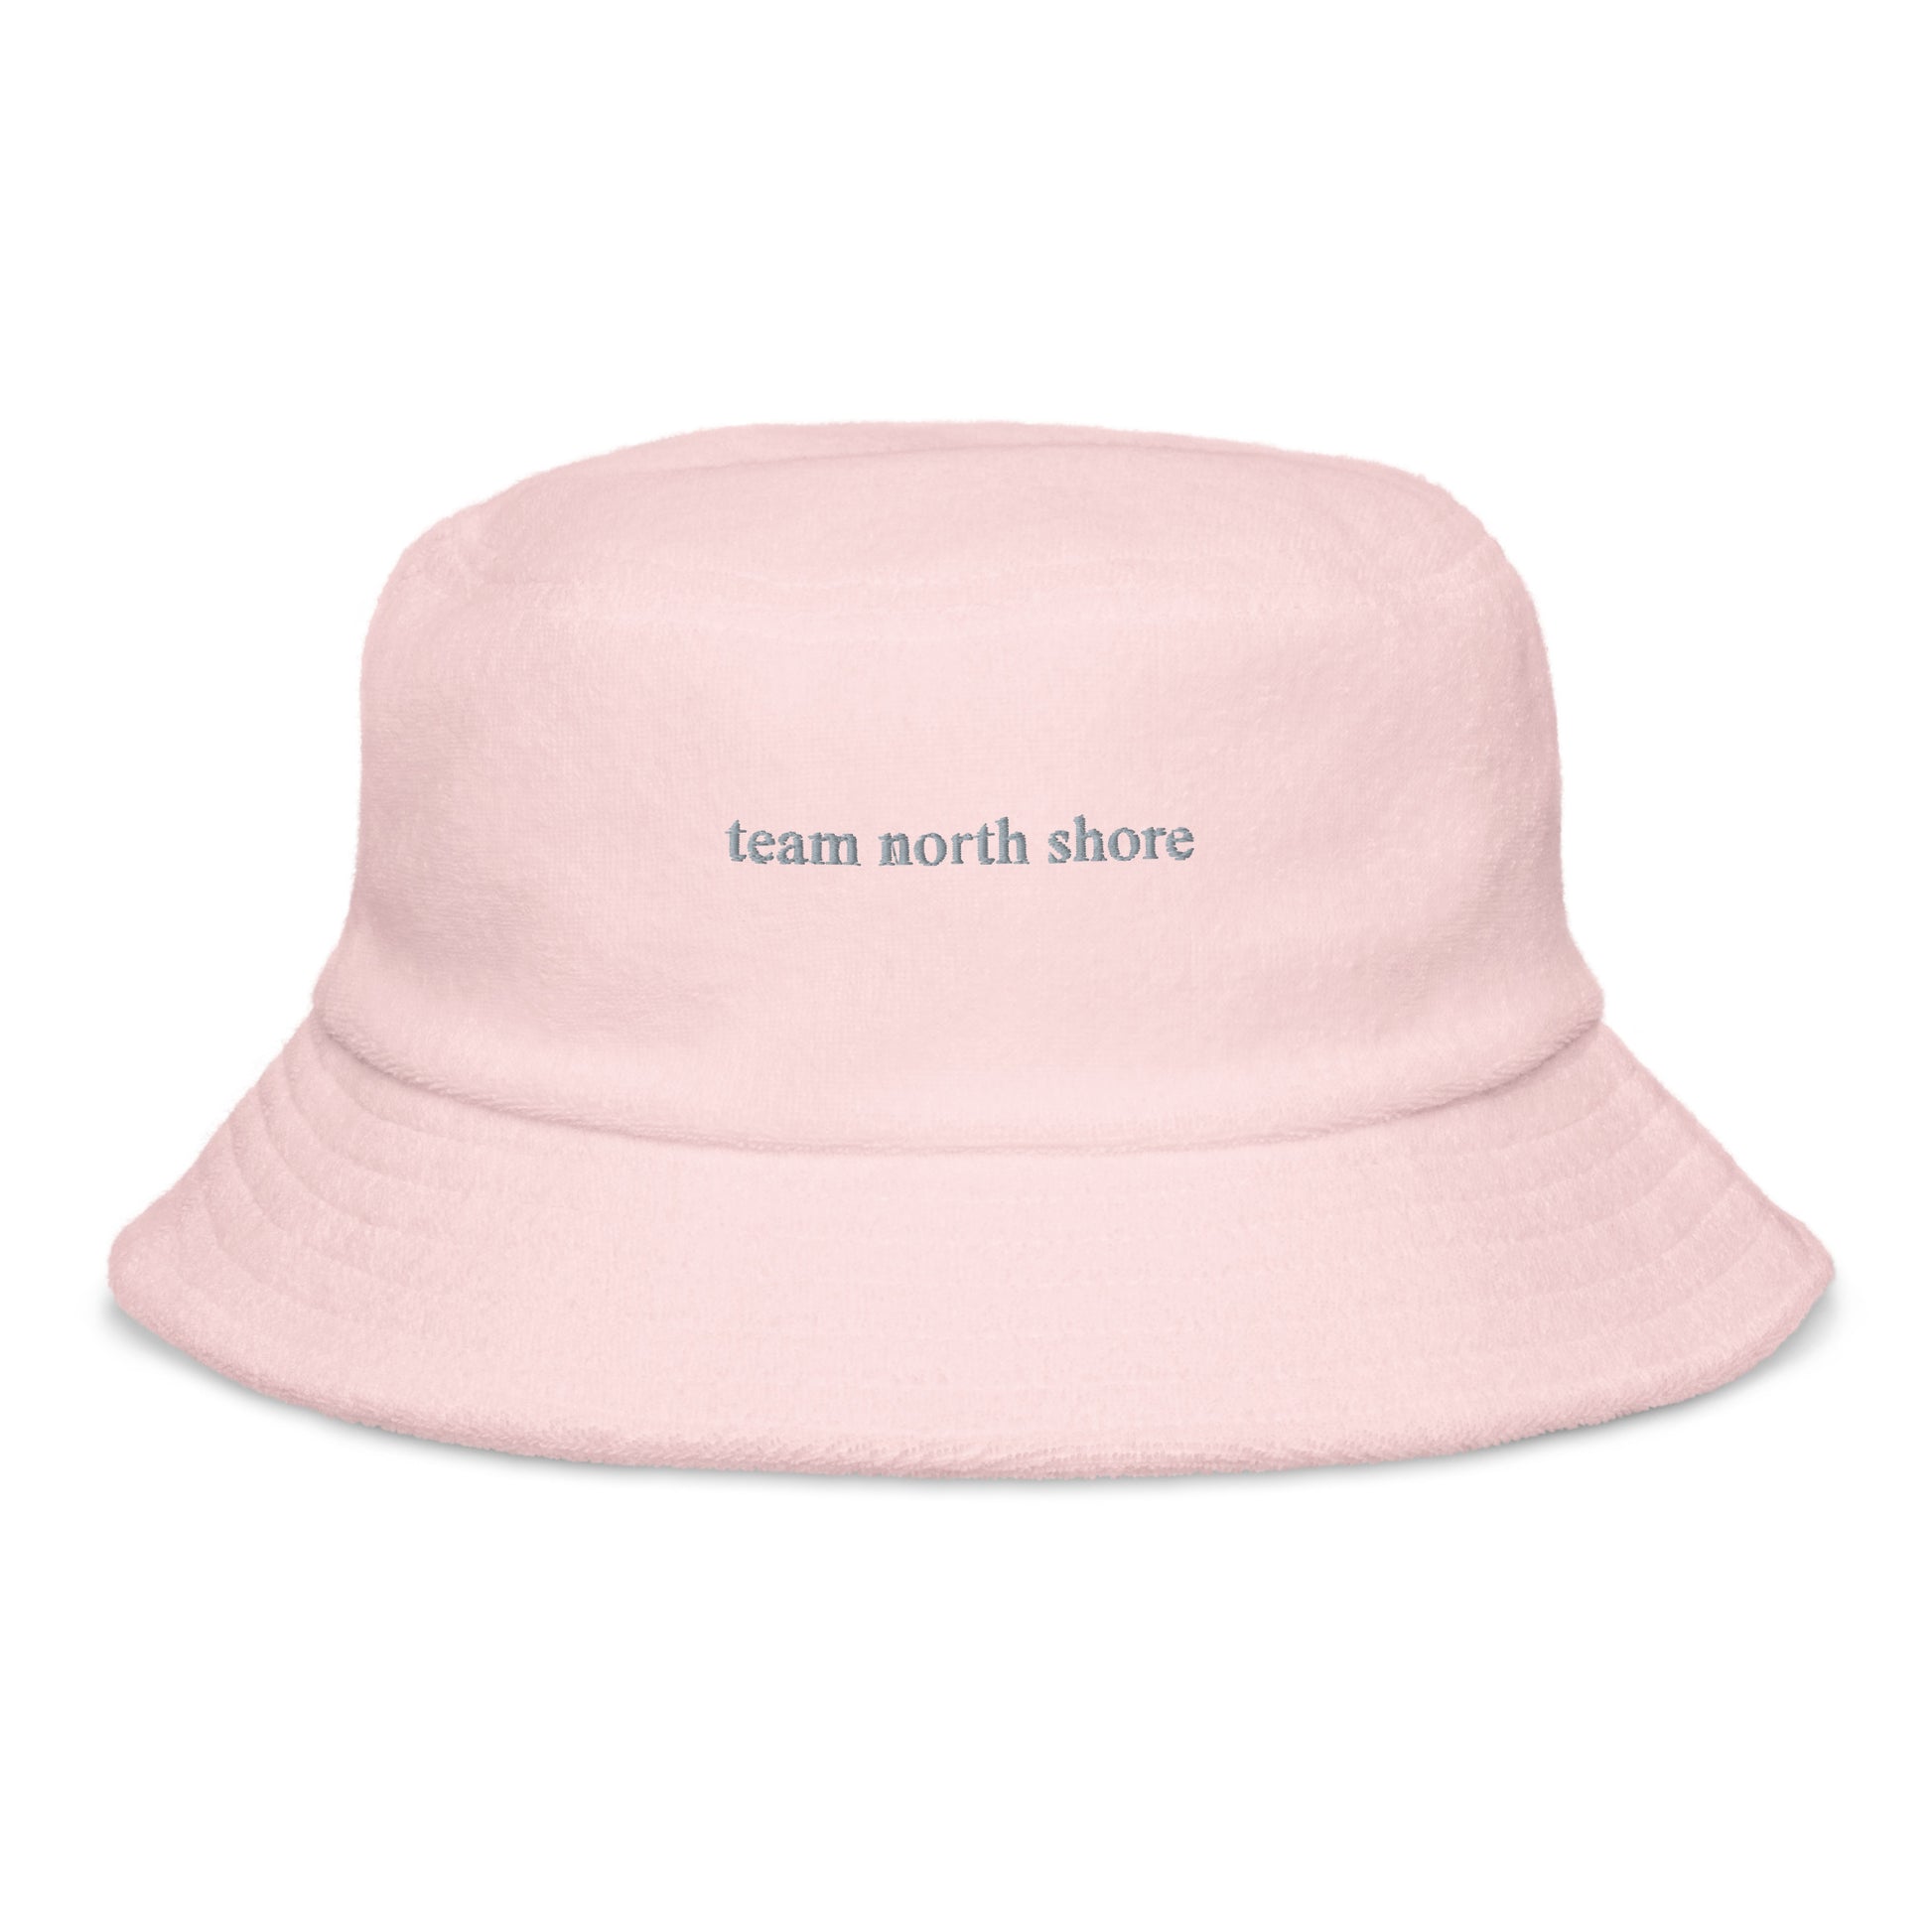 pink bucket hat that says "team north shore" in grey lettering